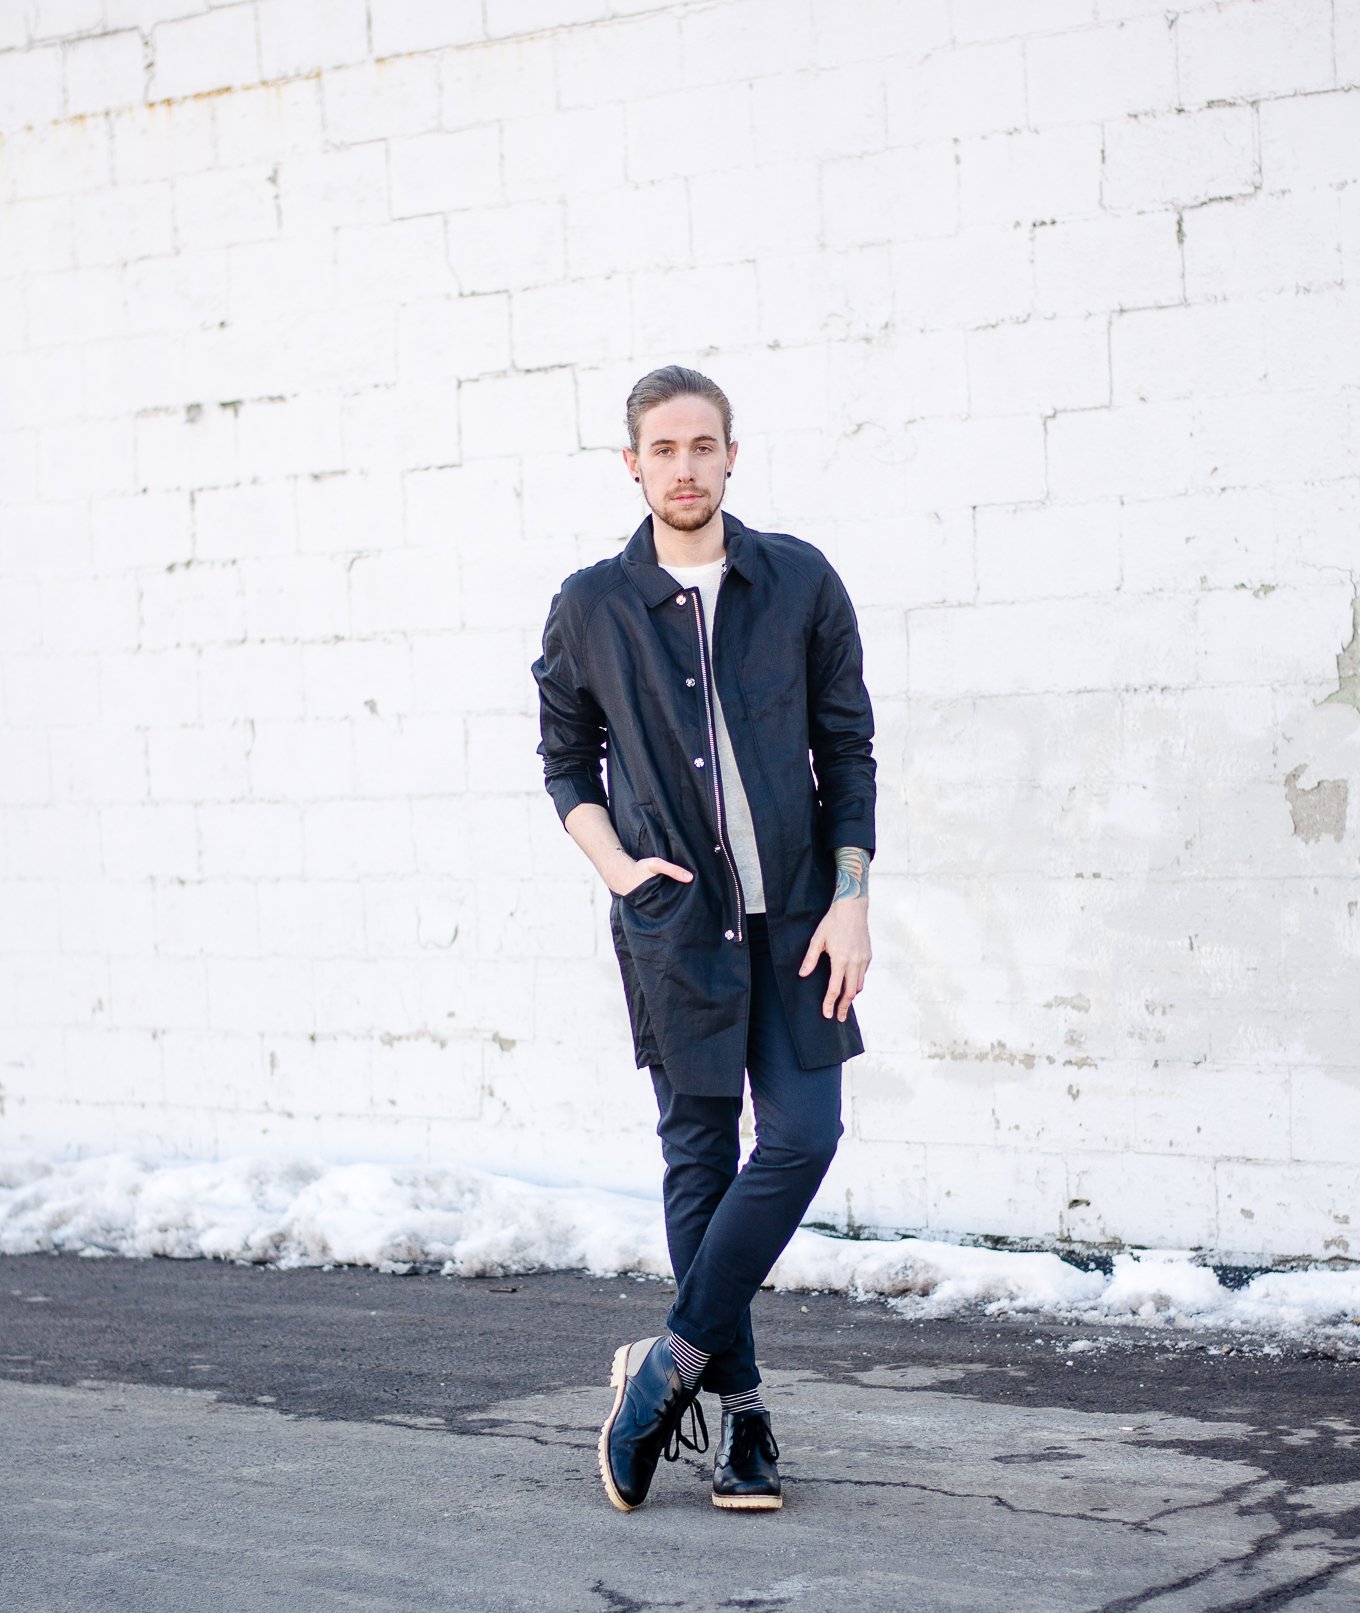 The Kentucky Gent, a men's fashion and lifestyle blogger, introduces H&M's Modern Essentials Selected by David Beckham.